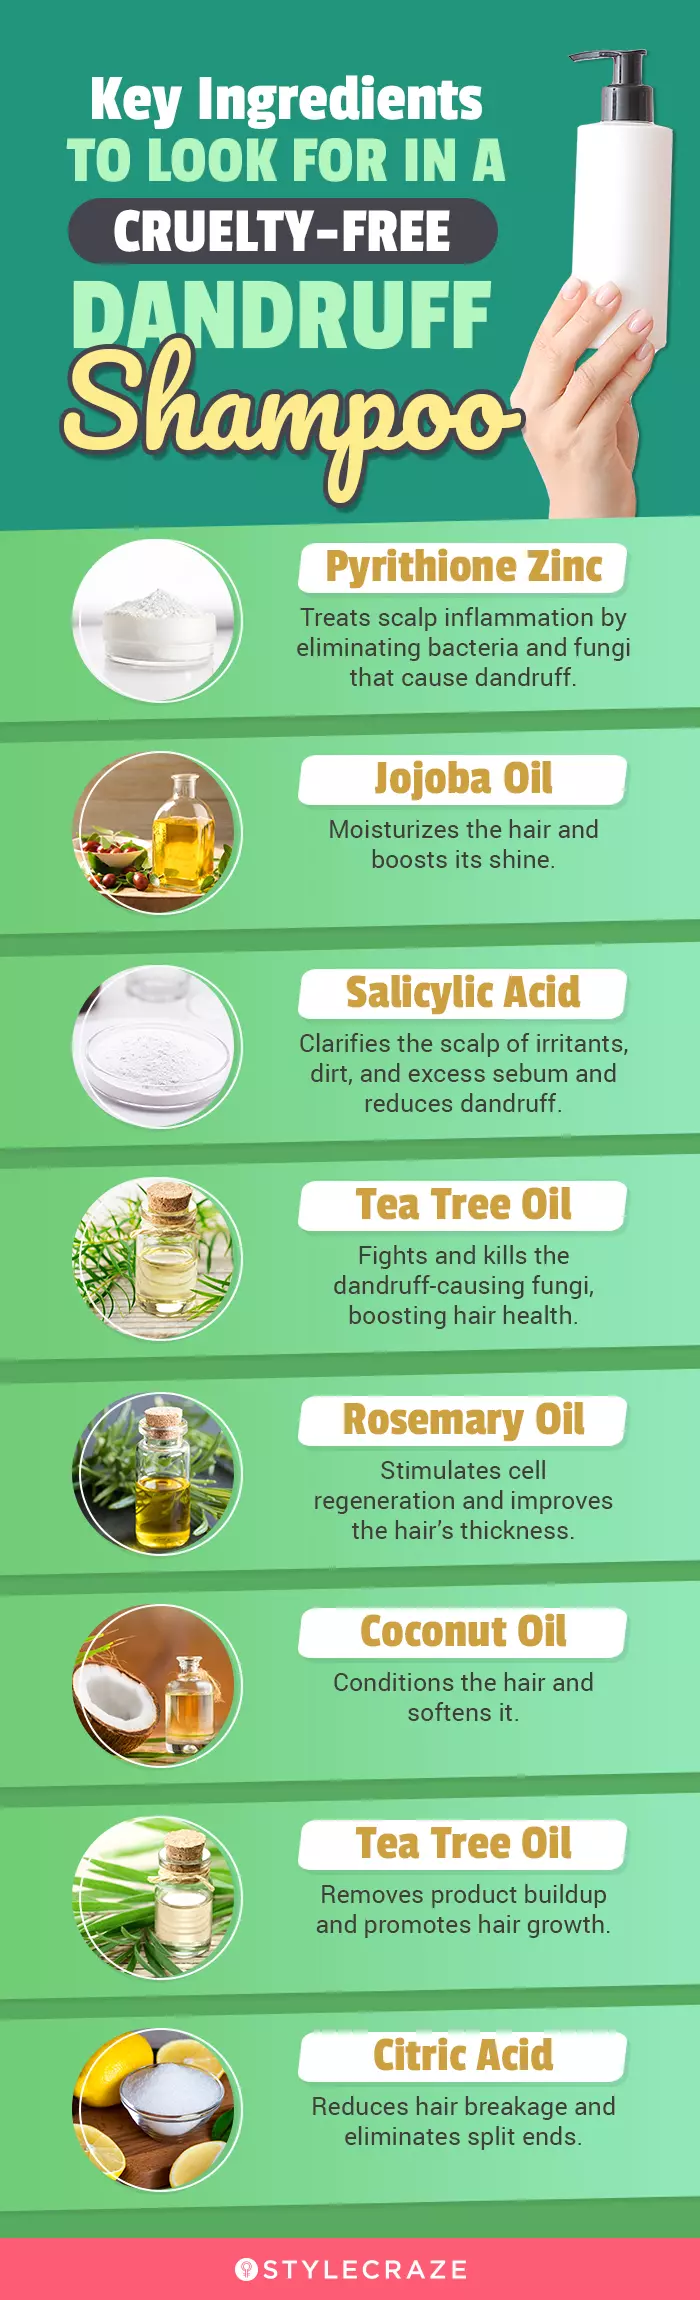 Key Ingredients To Look For In A Cruelty-Free Dandruff Shampoo (infographic)